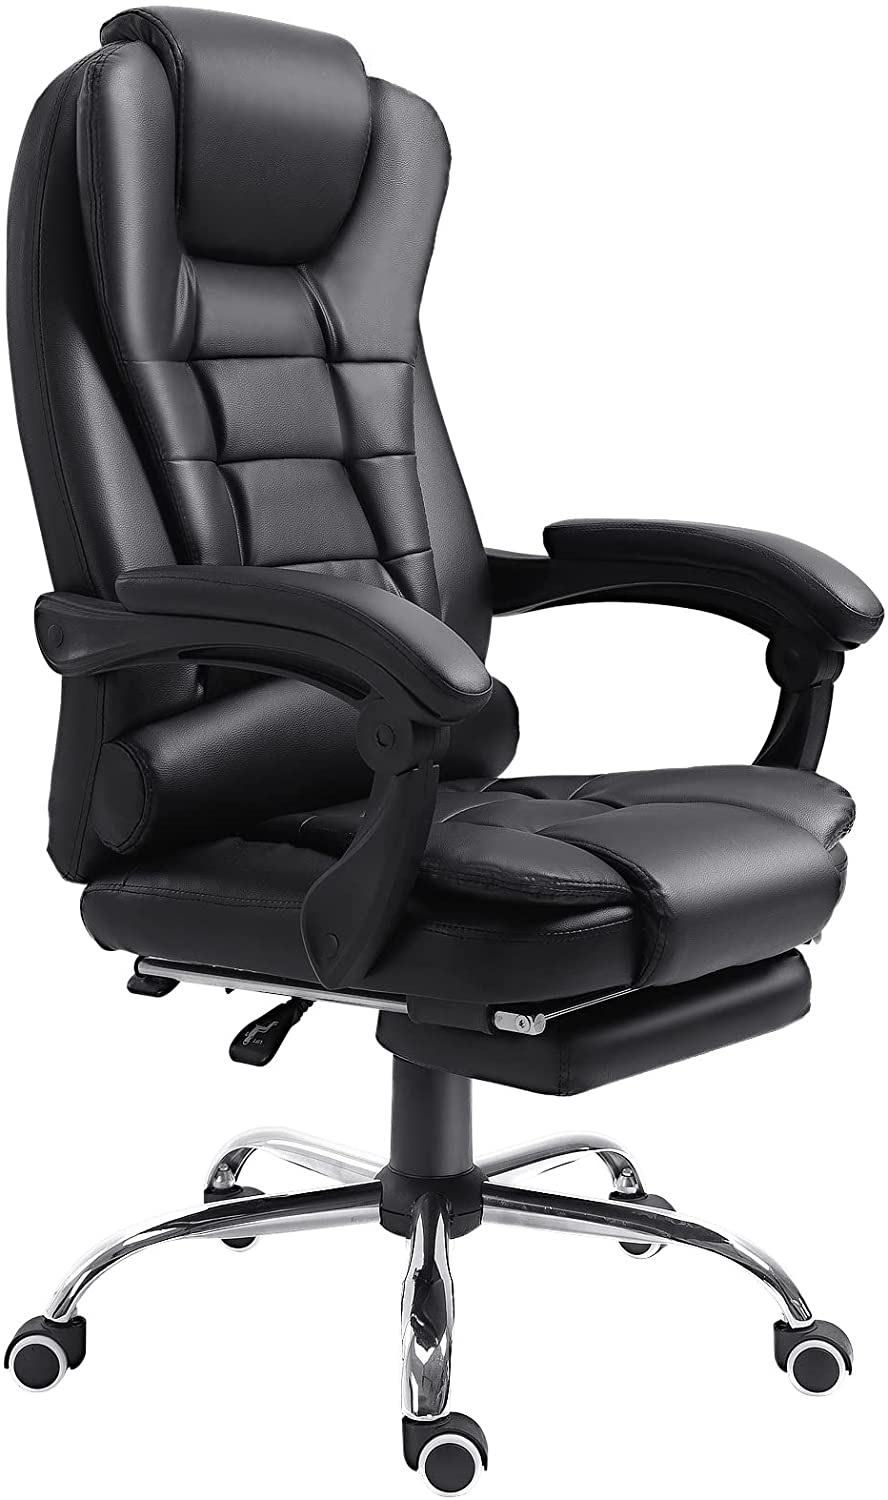 HOMCOM Ergonomic Executive Office Chair High Back PU Leather Reclining Chair with Retractable Footrest